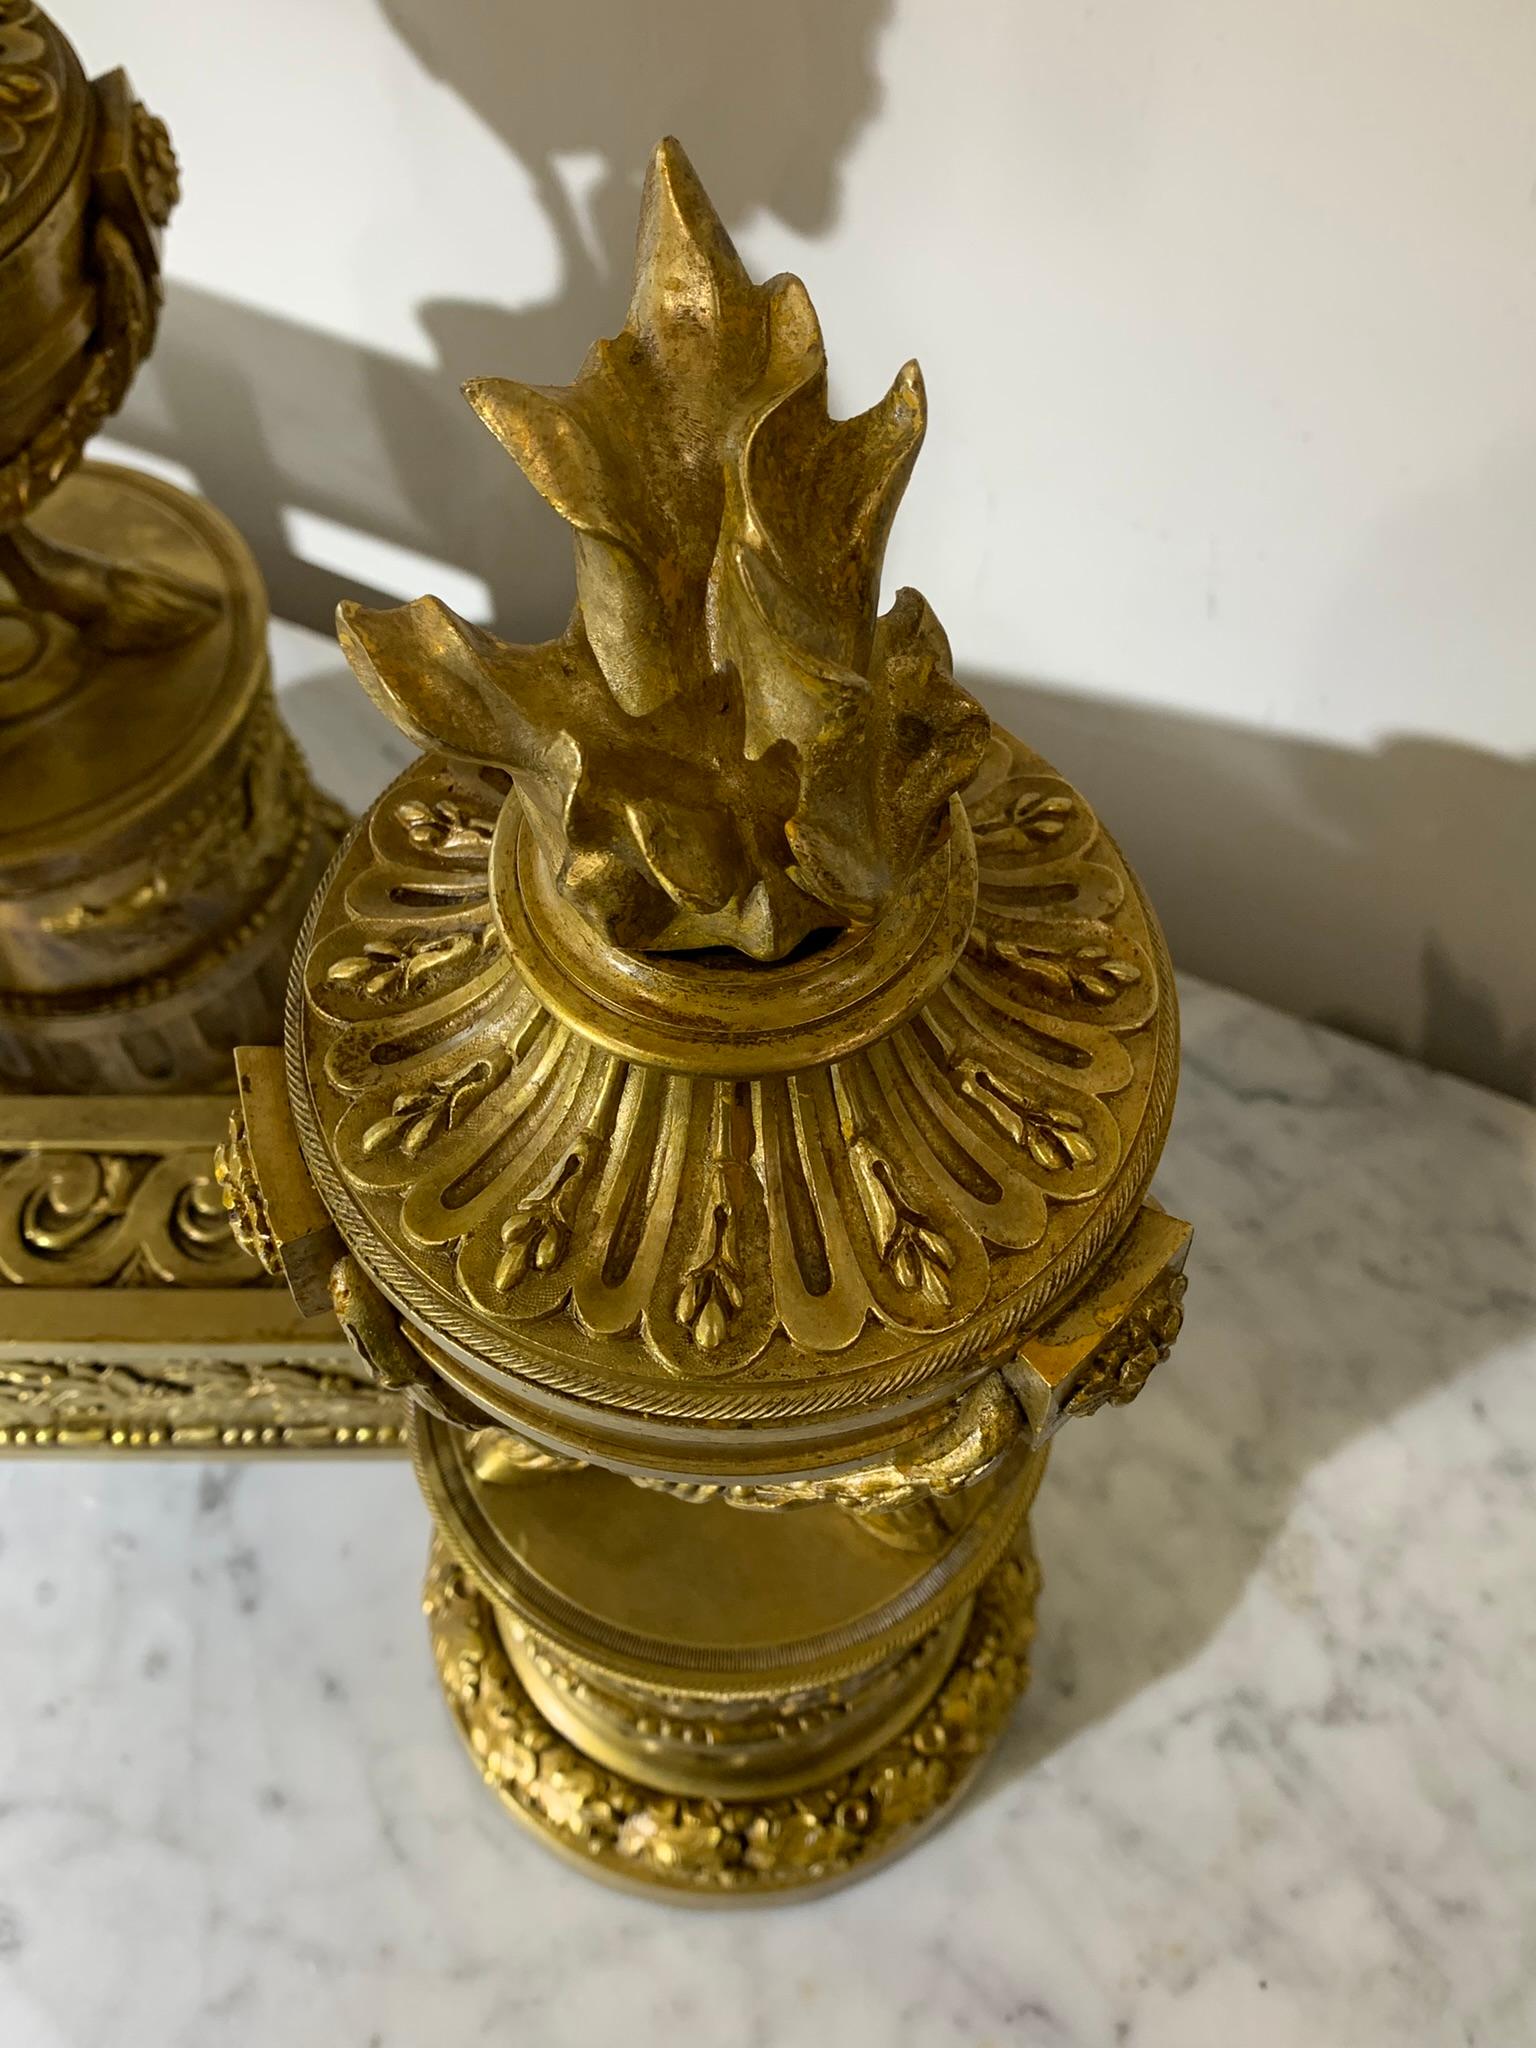 LATE 18th CENTURY PAIR OF NEOCLASSICAL GILDED BRONZE ANDIRONS For Sale 7